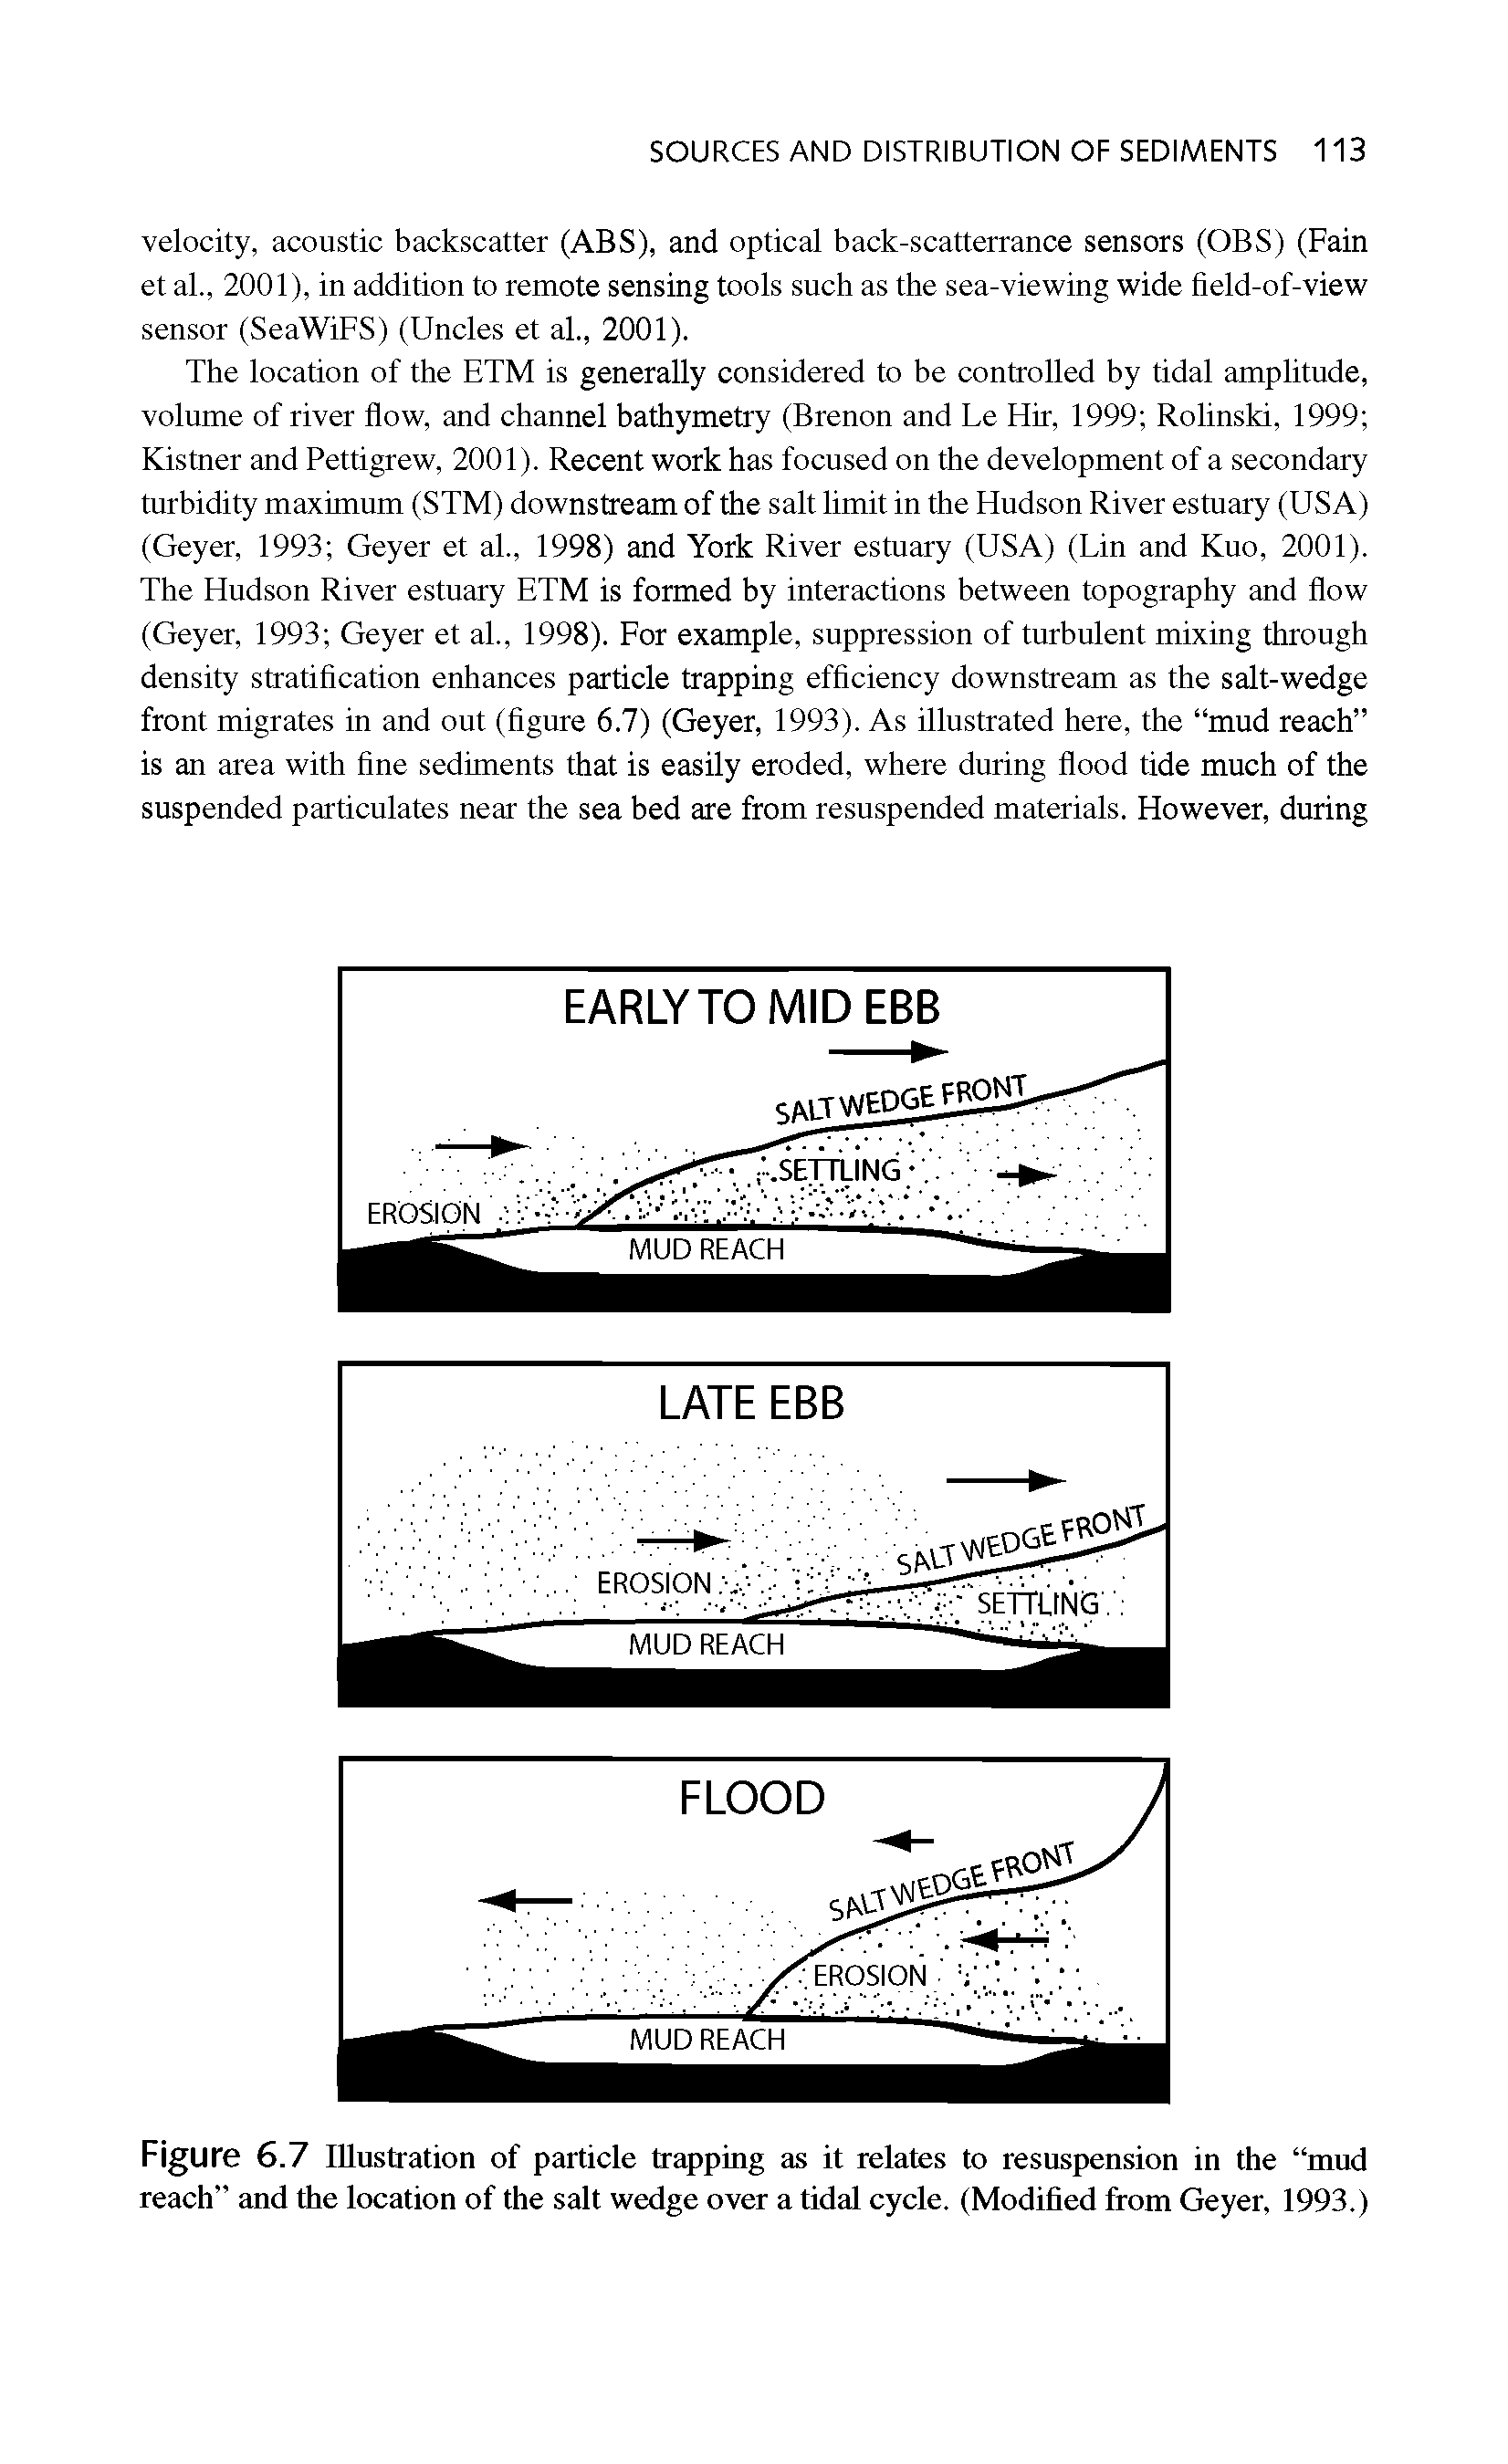 Figure 6.7 Illustration of particle trapping as it relates to resuspension in the mud reach and the location of the salt wedge over a tidal cycle. (Modified from Geyer, 1993.)...